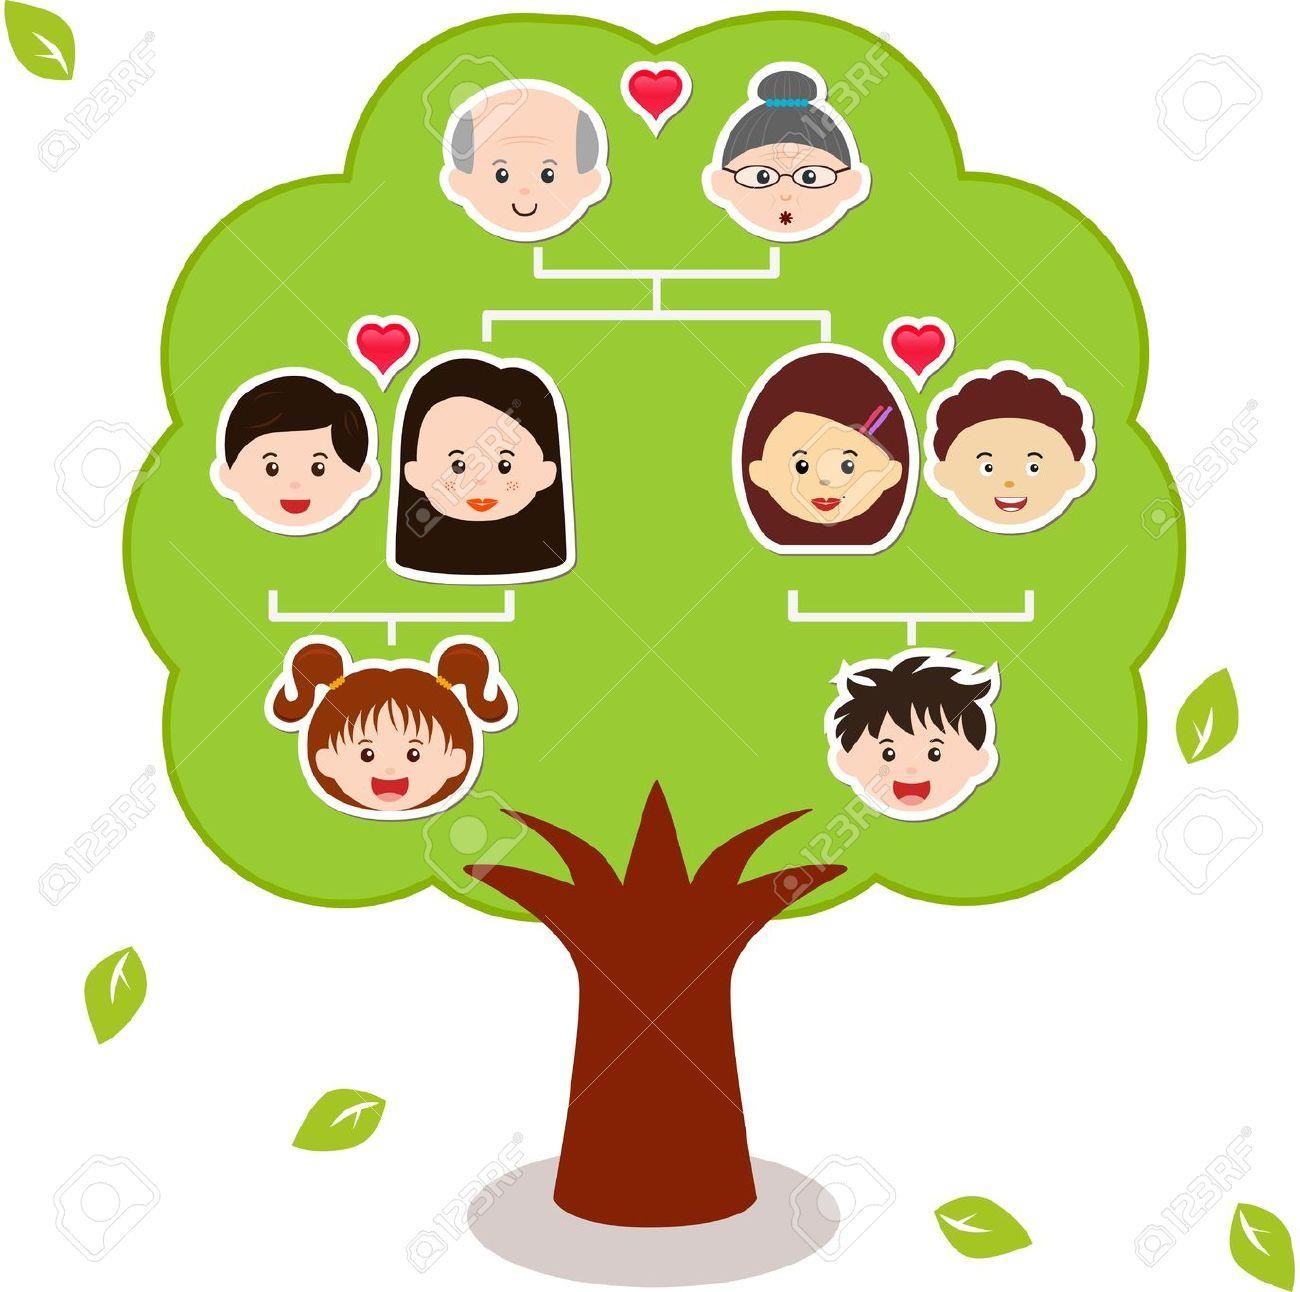 35+ Latest Background Images For Family Tree - Cool Background Collection